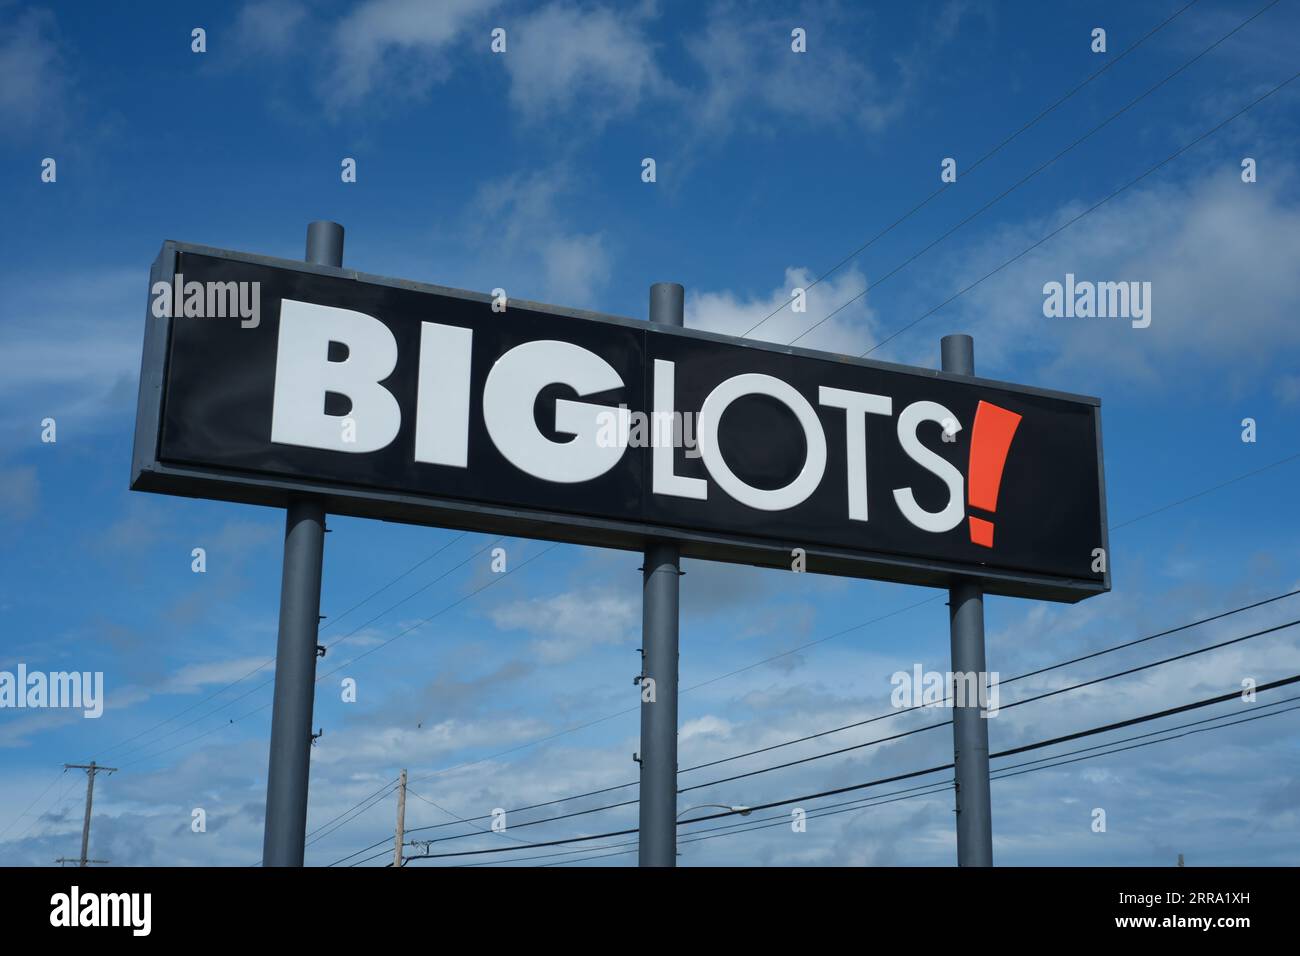 Big Lots discount store sign Stock Photo